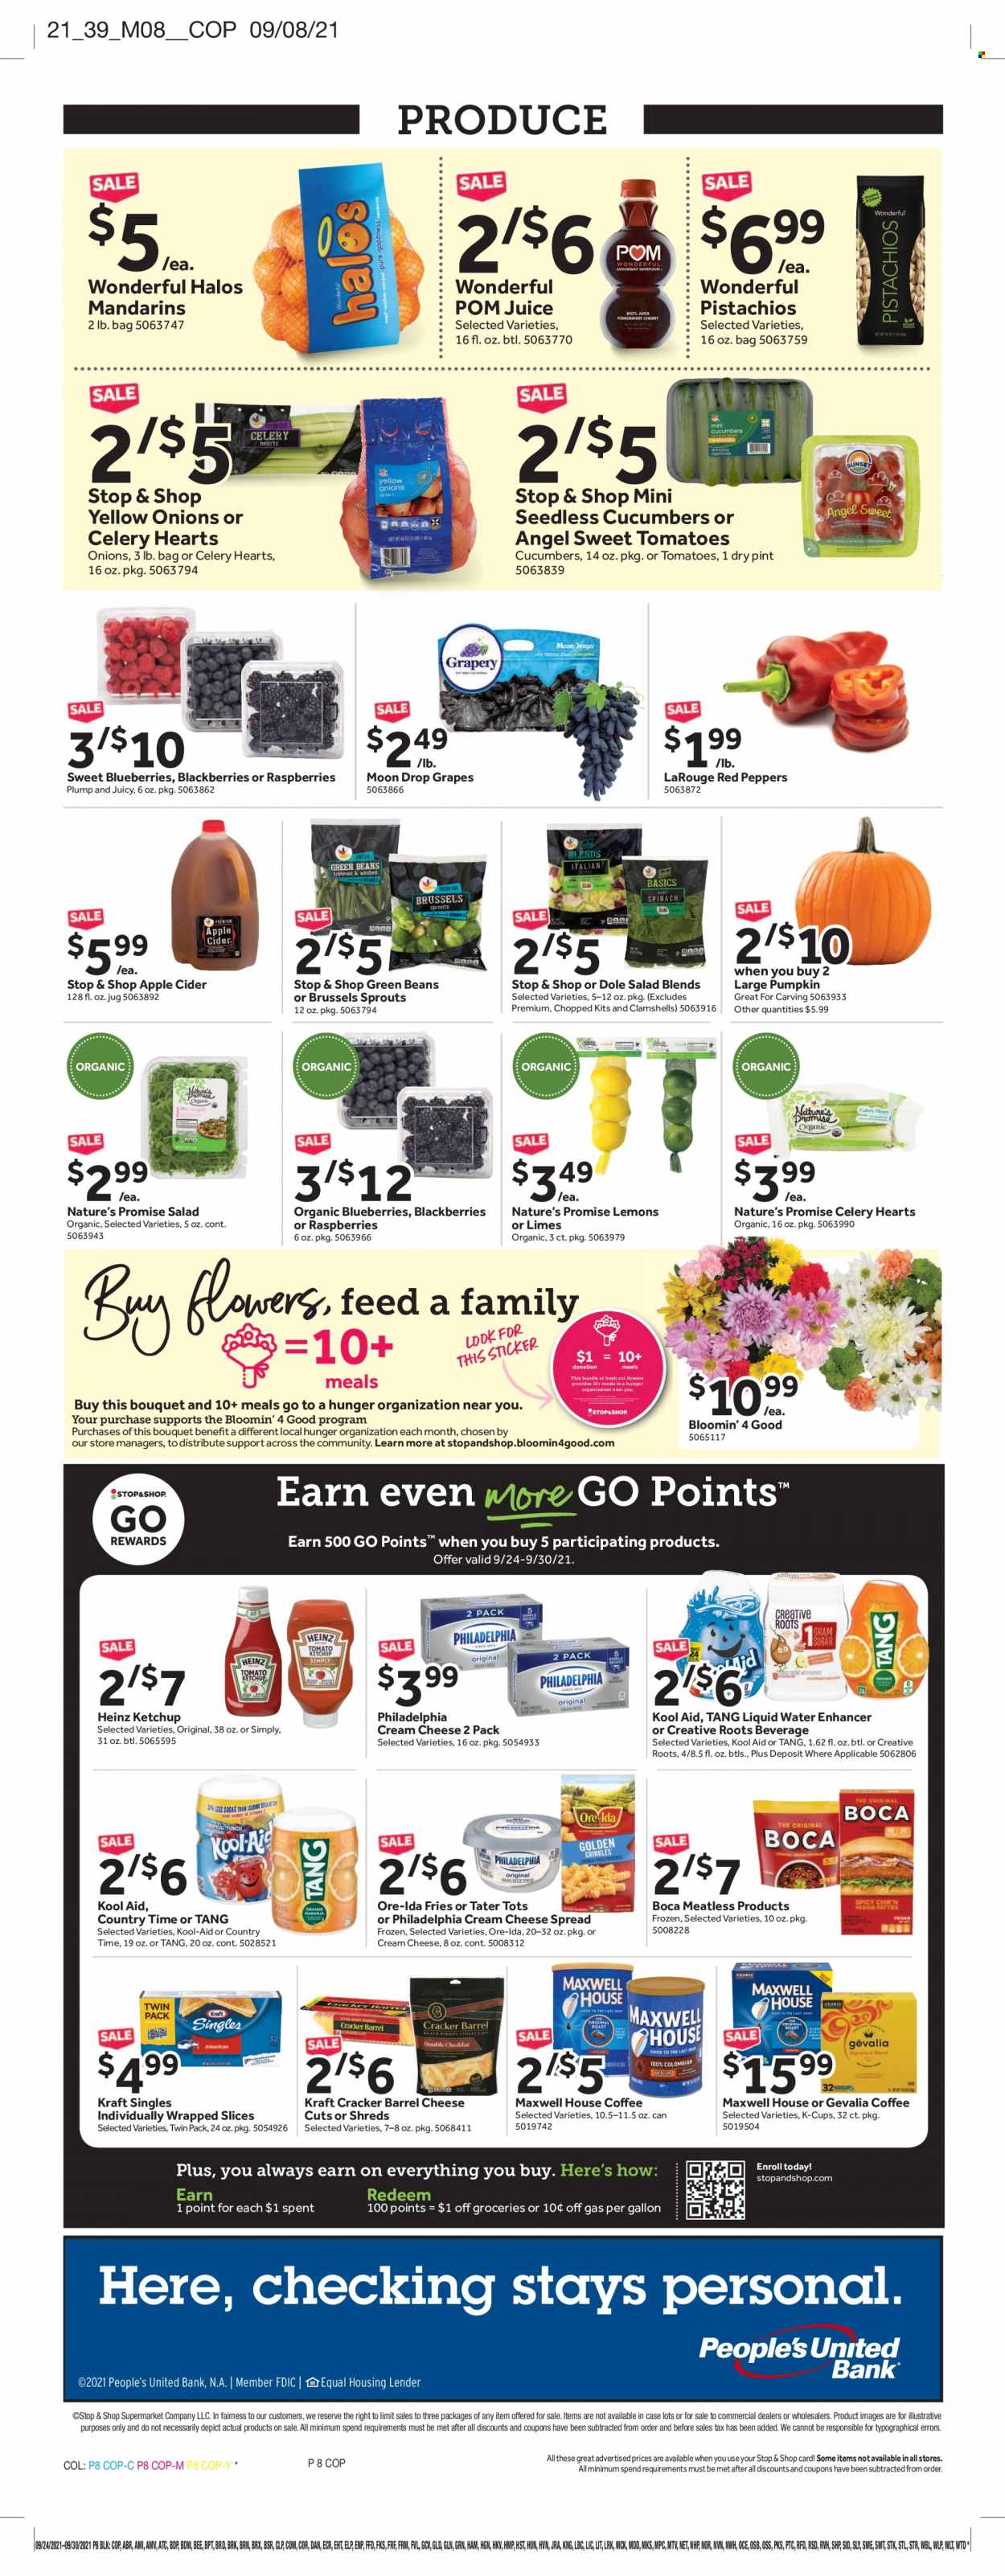 thumbnail - Stop & Shop Flyer - 09/24/2021 - 09/30/2021 - Sales products - Nature’s Promise, beans, green beans, pumpkin, salad, Dole, peppers, brussel sprouts, sleeved celery, red peppers, blackberries, blueberries, grapes, limes, mandarines, Kraft®, ham, cheese spread, sandwich slices, Philadelphia, Kraft Singles, potato fries, Ore-Ida, tater tots, crackers, Heinz, ketchup, pistachios, juice, Country Time, Maxwell House, coffee capsules, K-Cups, Gevalia, apple cider, cider, lemons. Page 8.